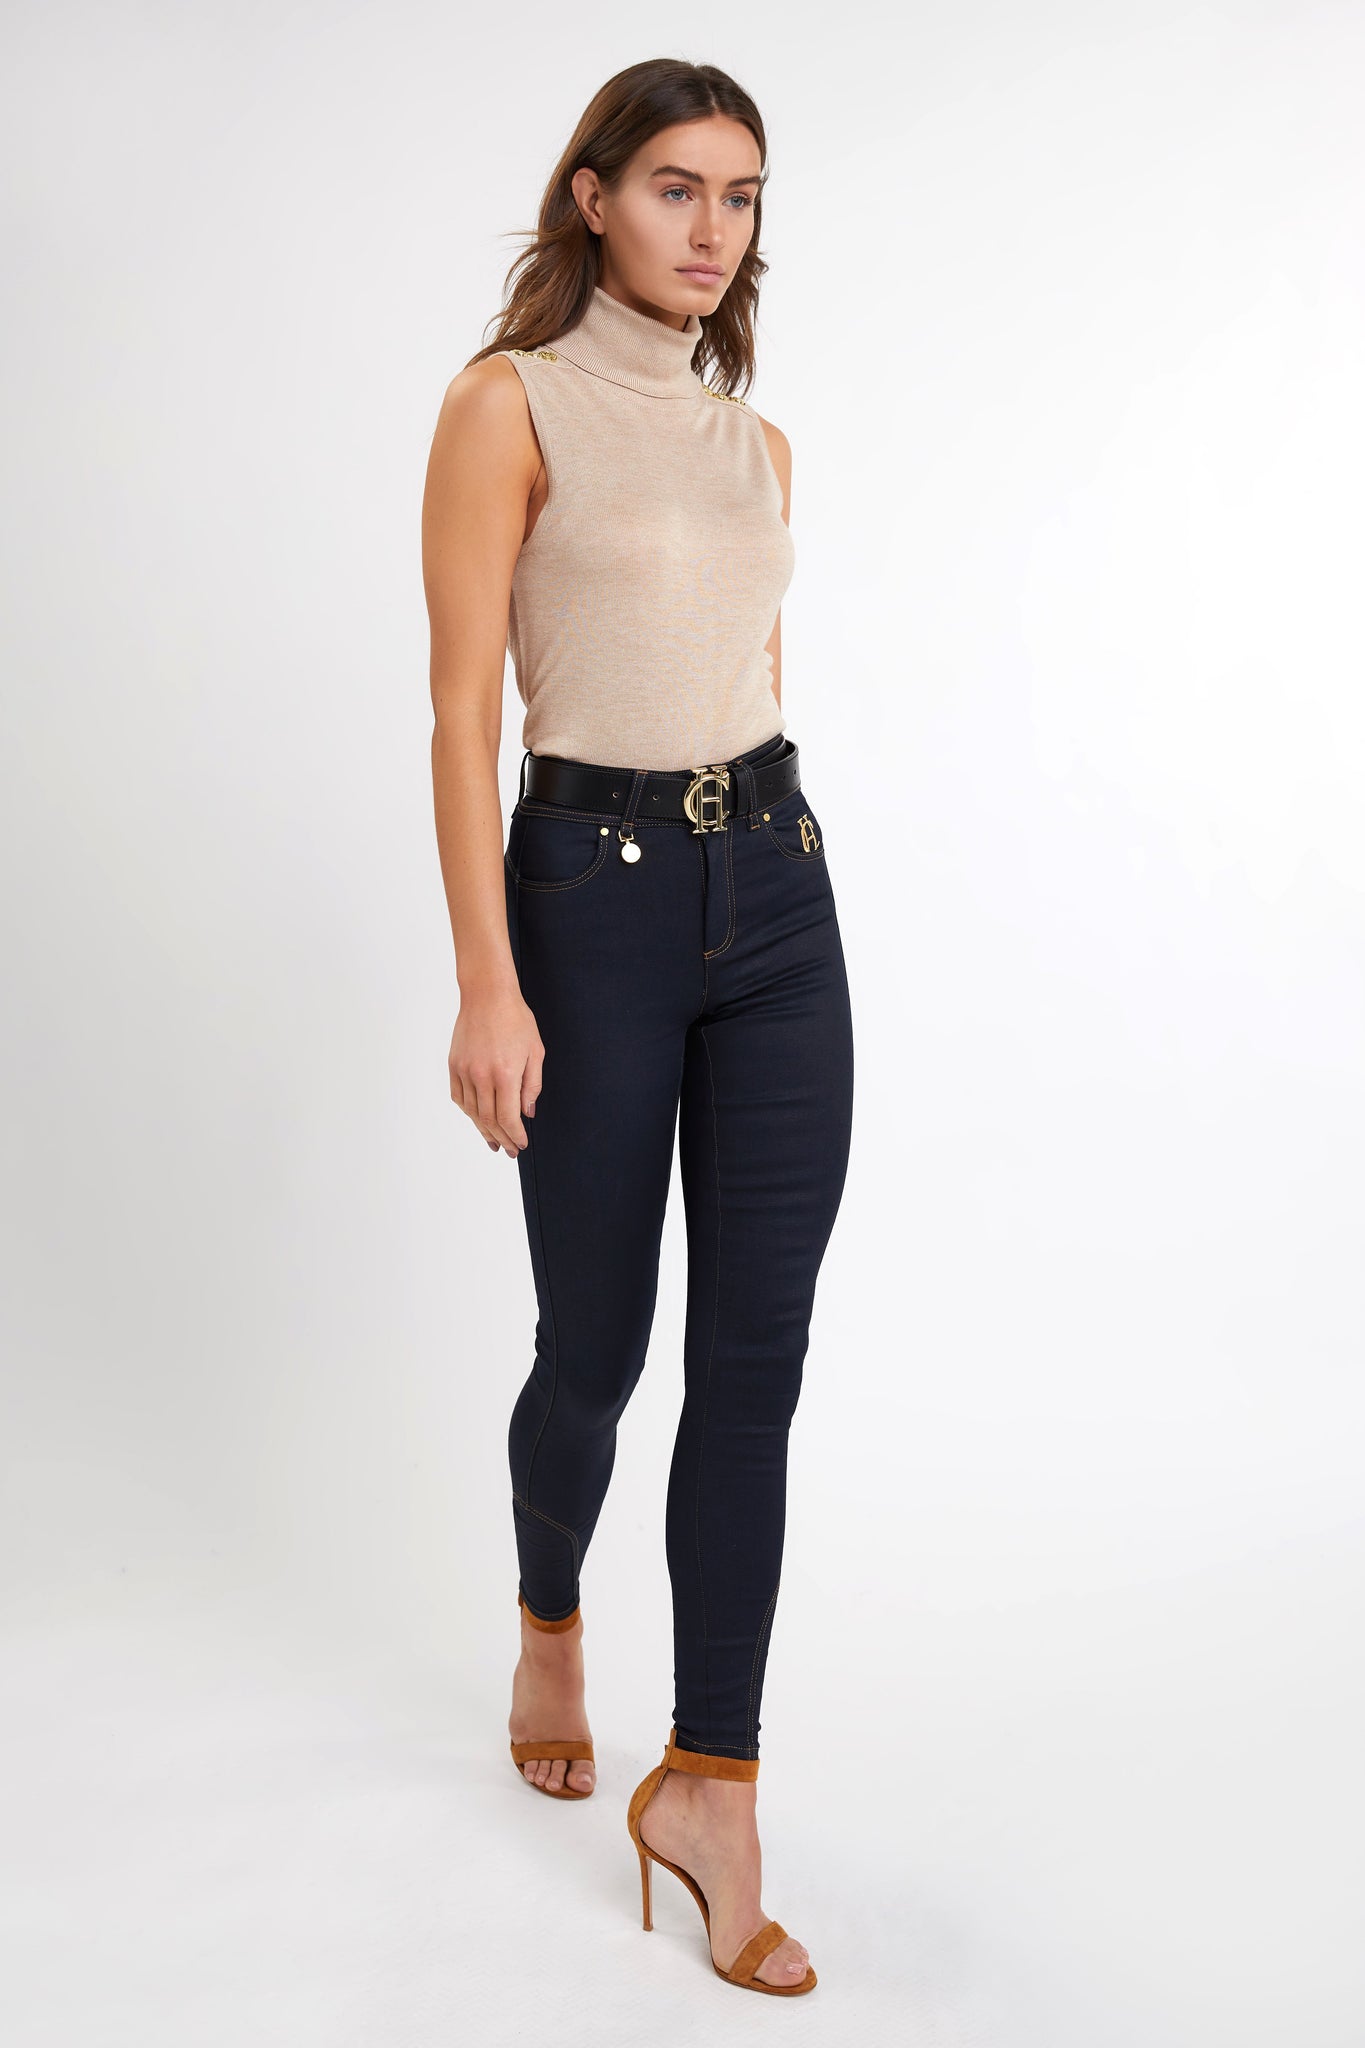 fitted lightweight sleeveless rollneck knit in camel with gold button detail across shoulders worn with navy skinny jeans and black belt